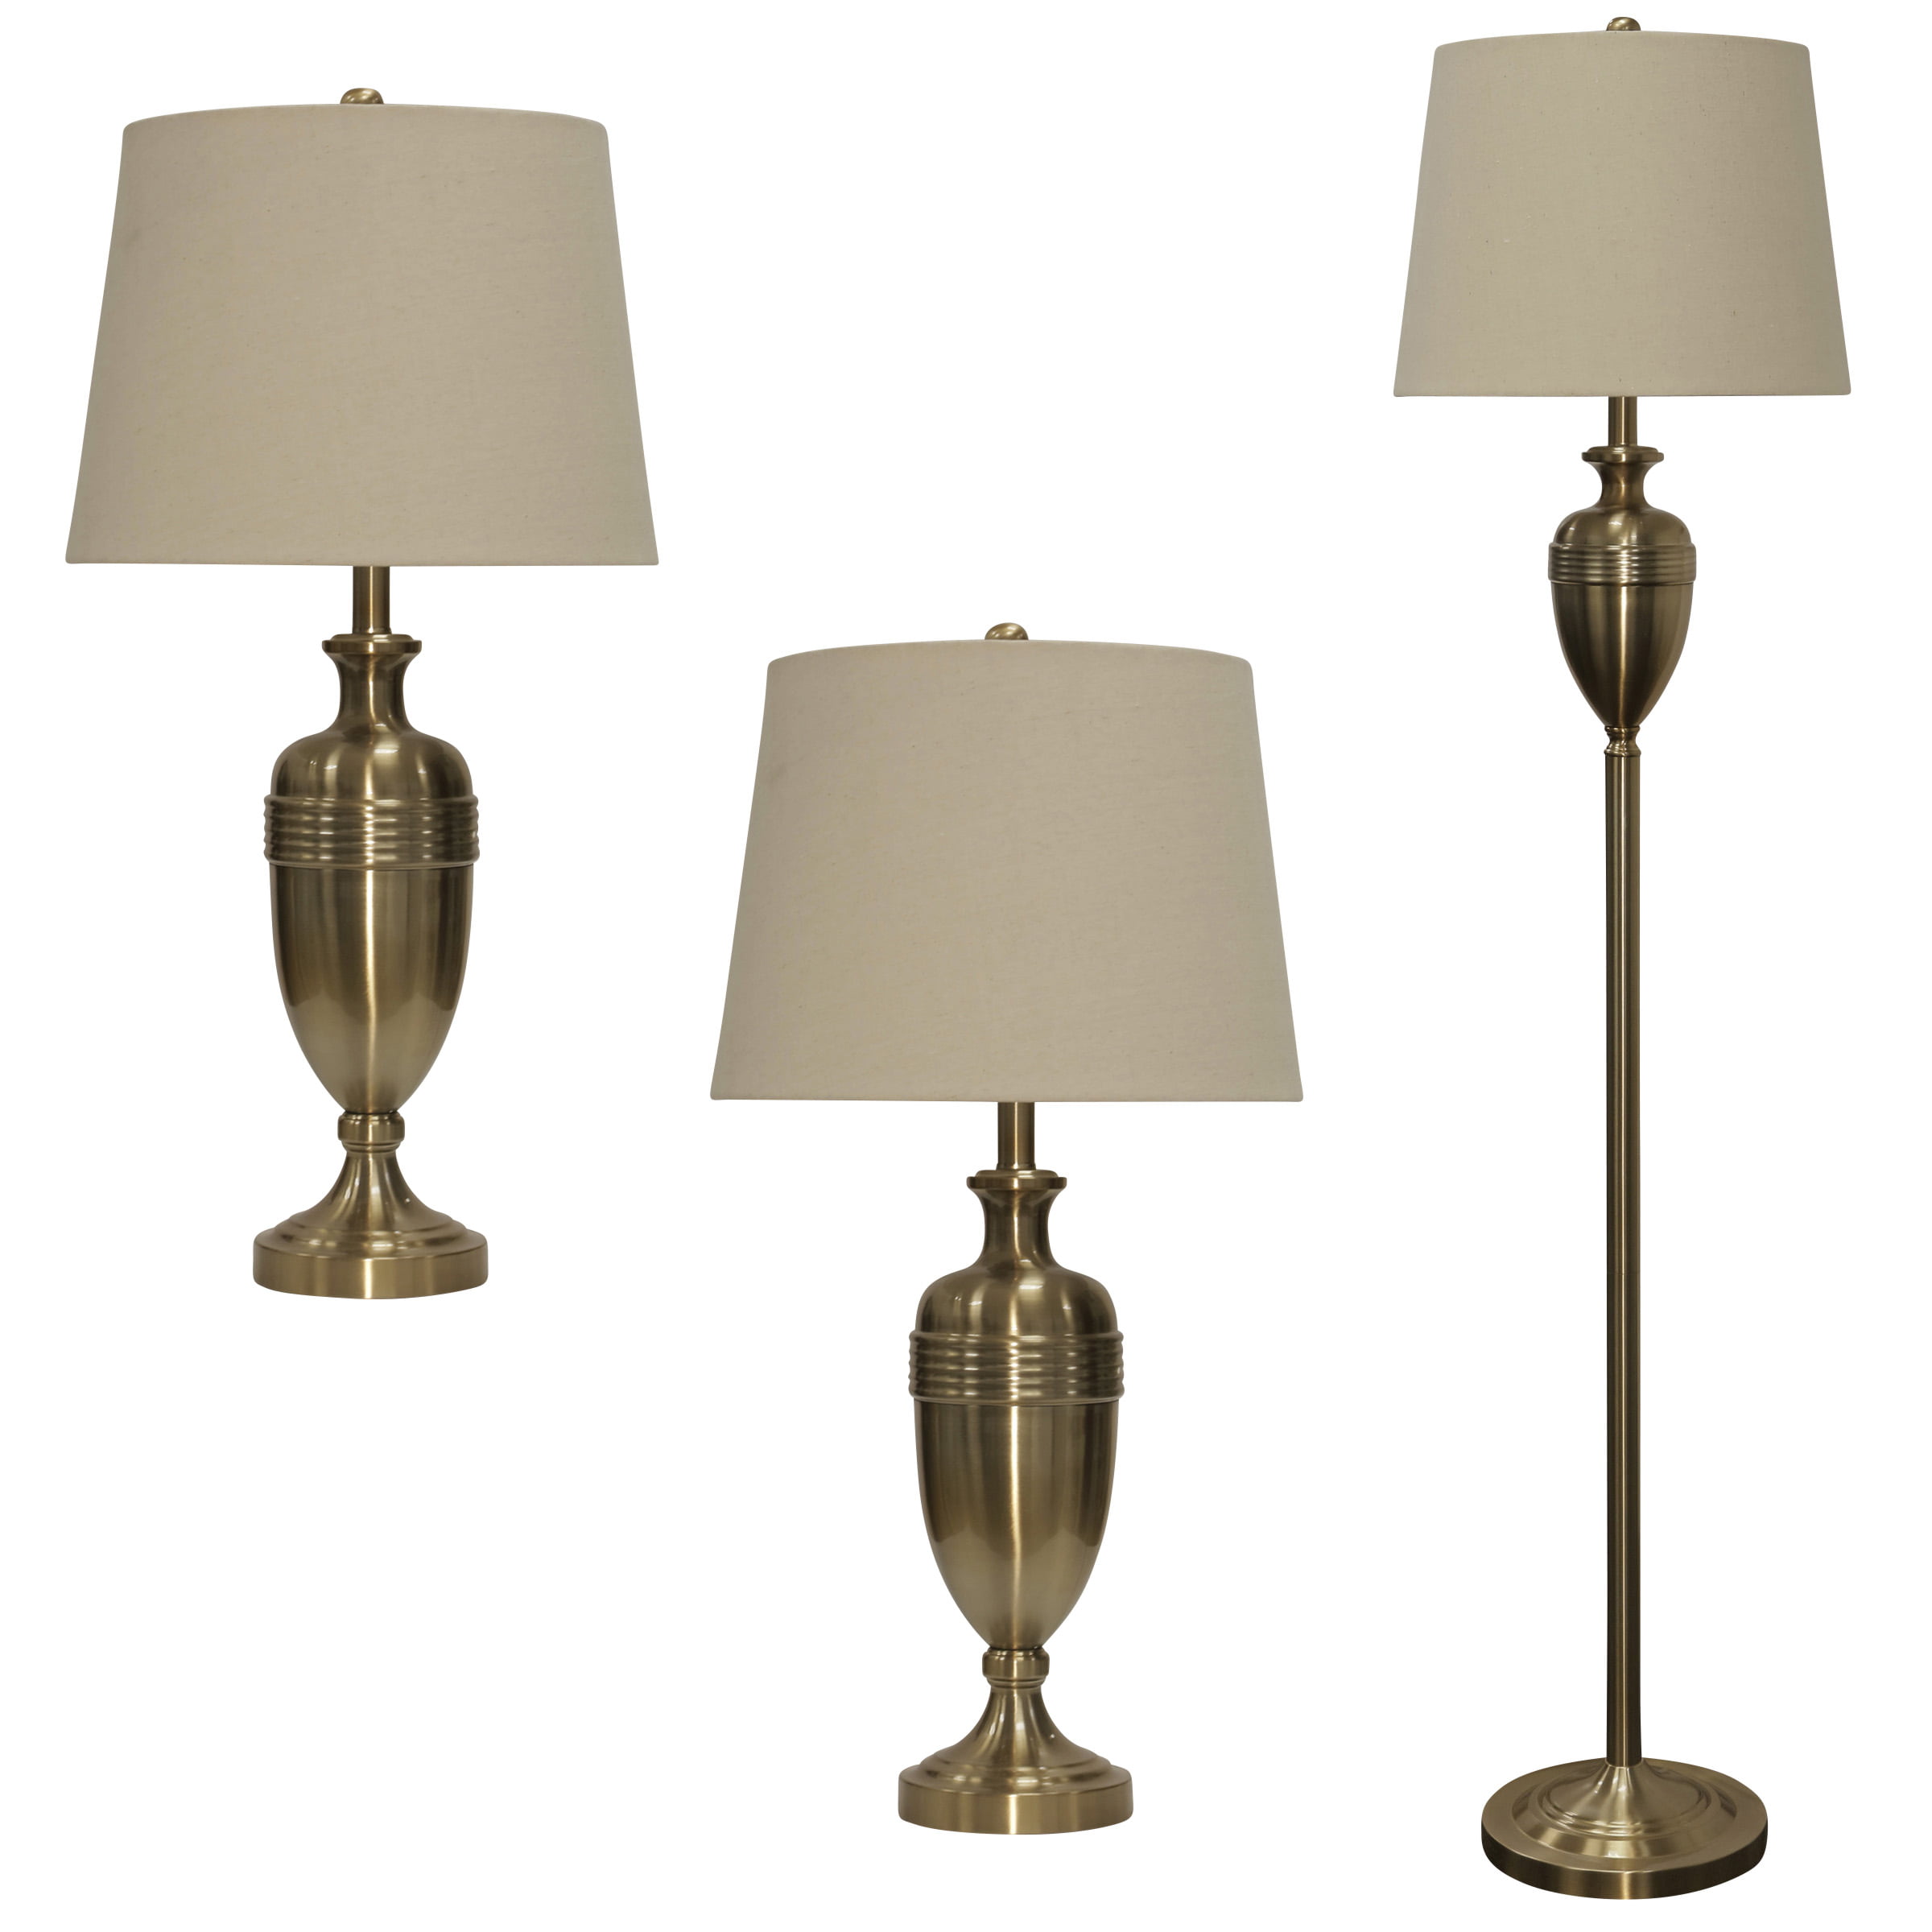 Antique Brass Table and Floor Lamp Set - Beige Shade - Antique Brass